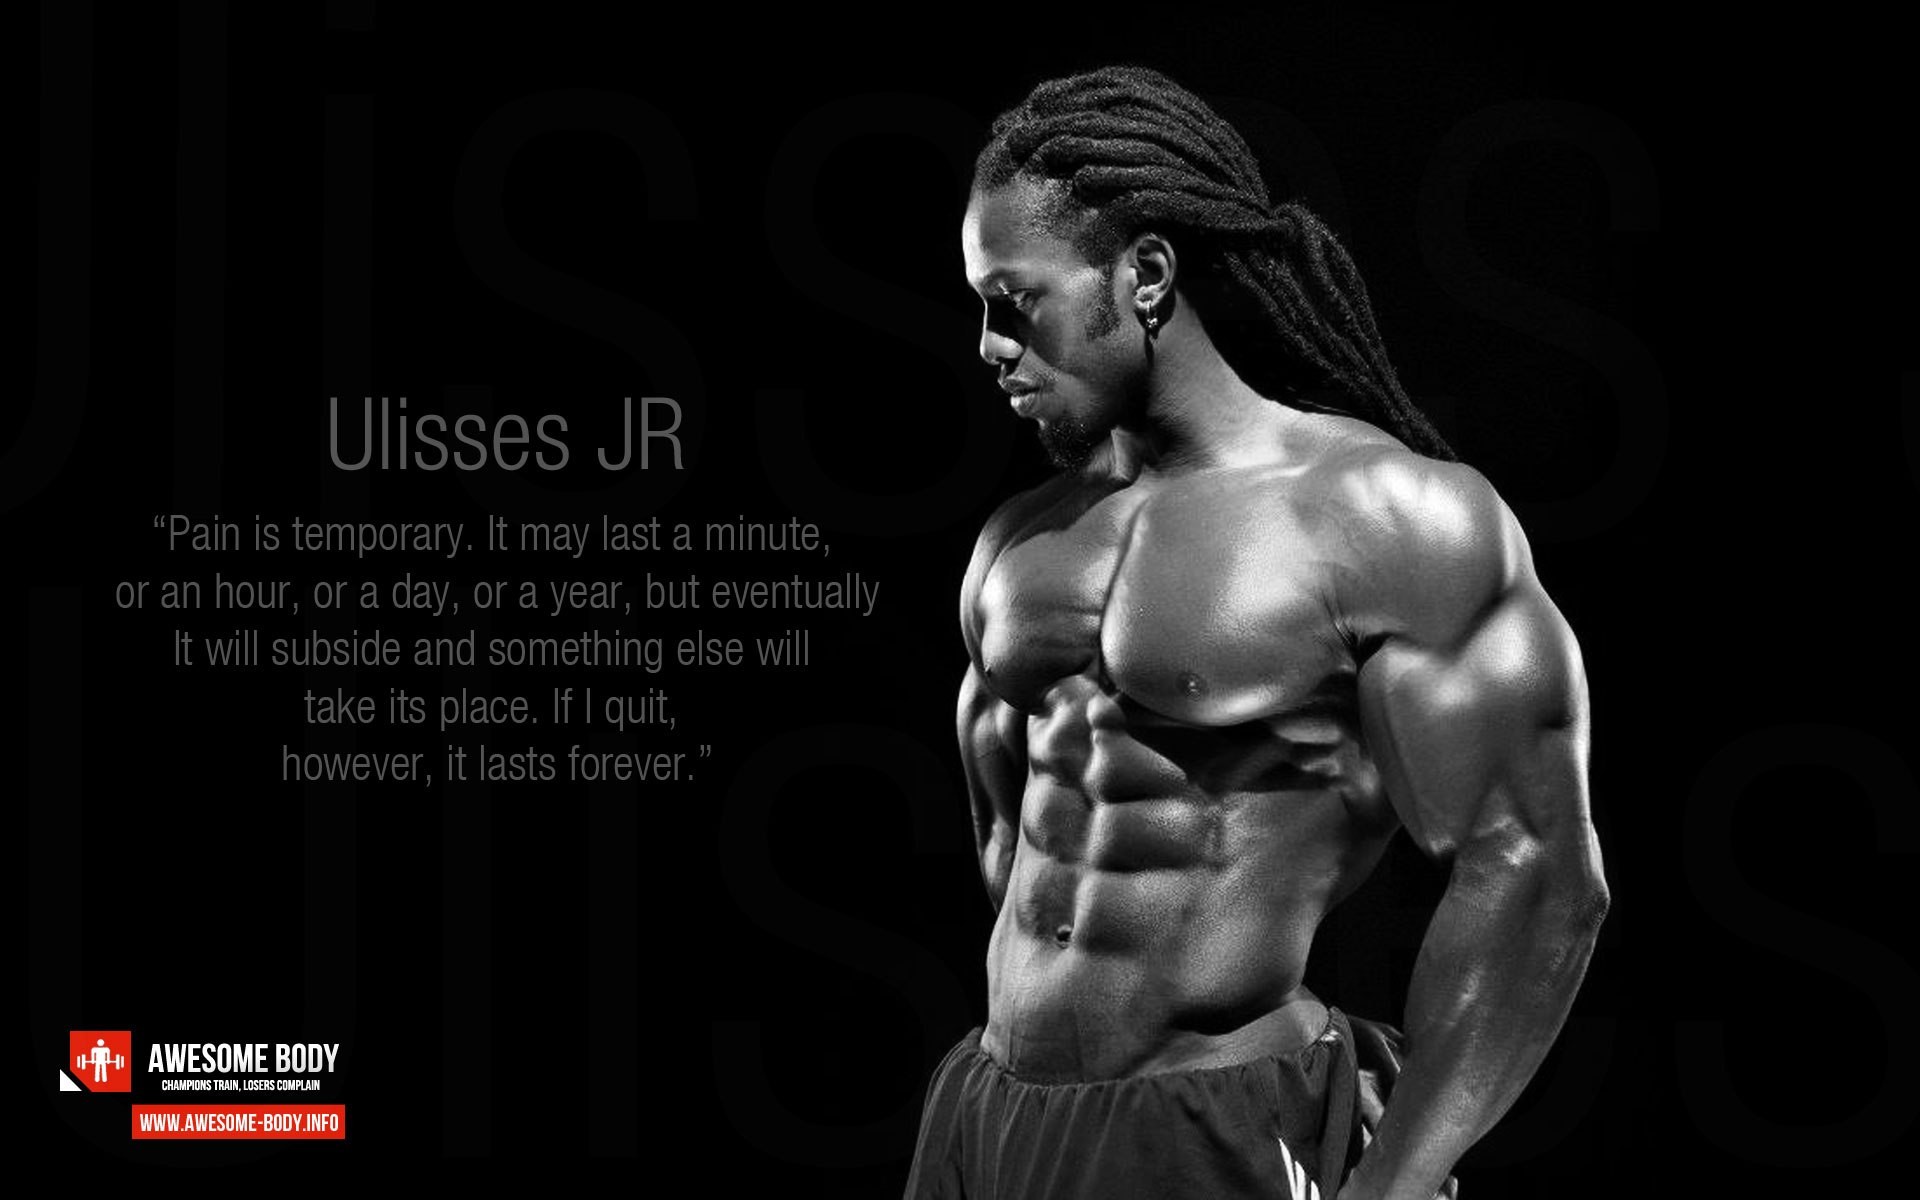 1920x1200 Ulisses JR Motivation awesome body wallpaper